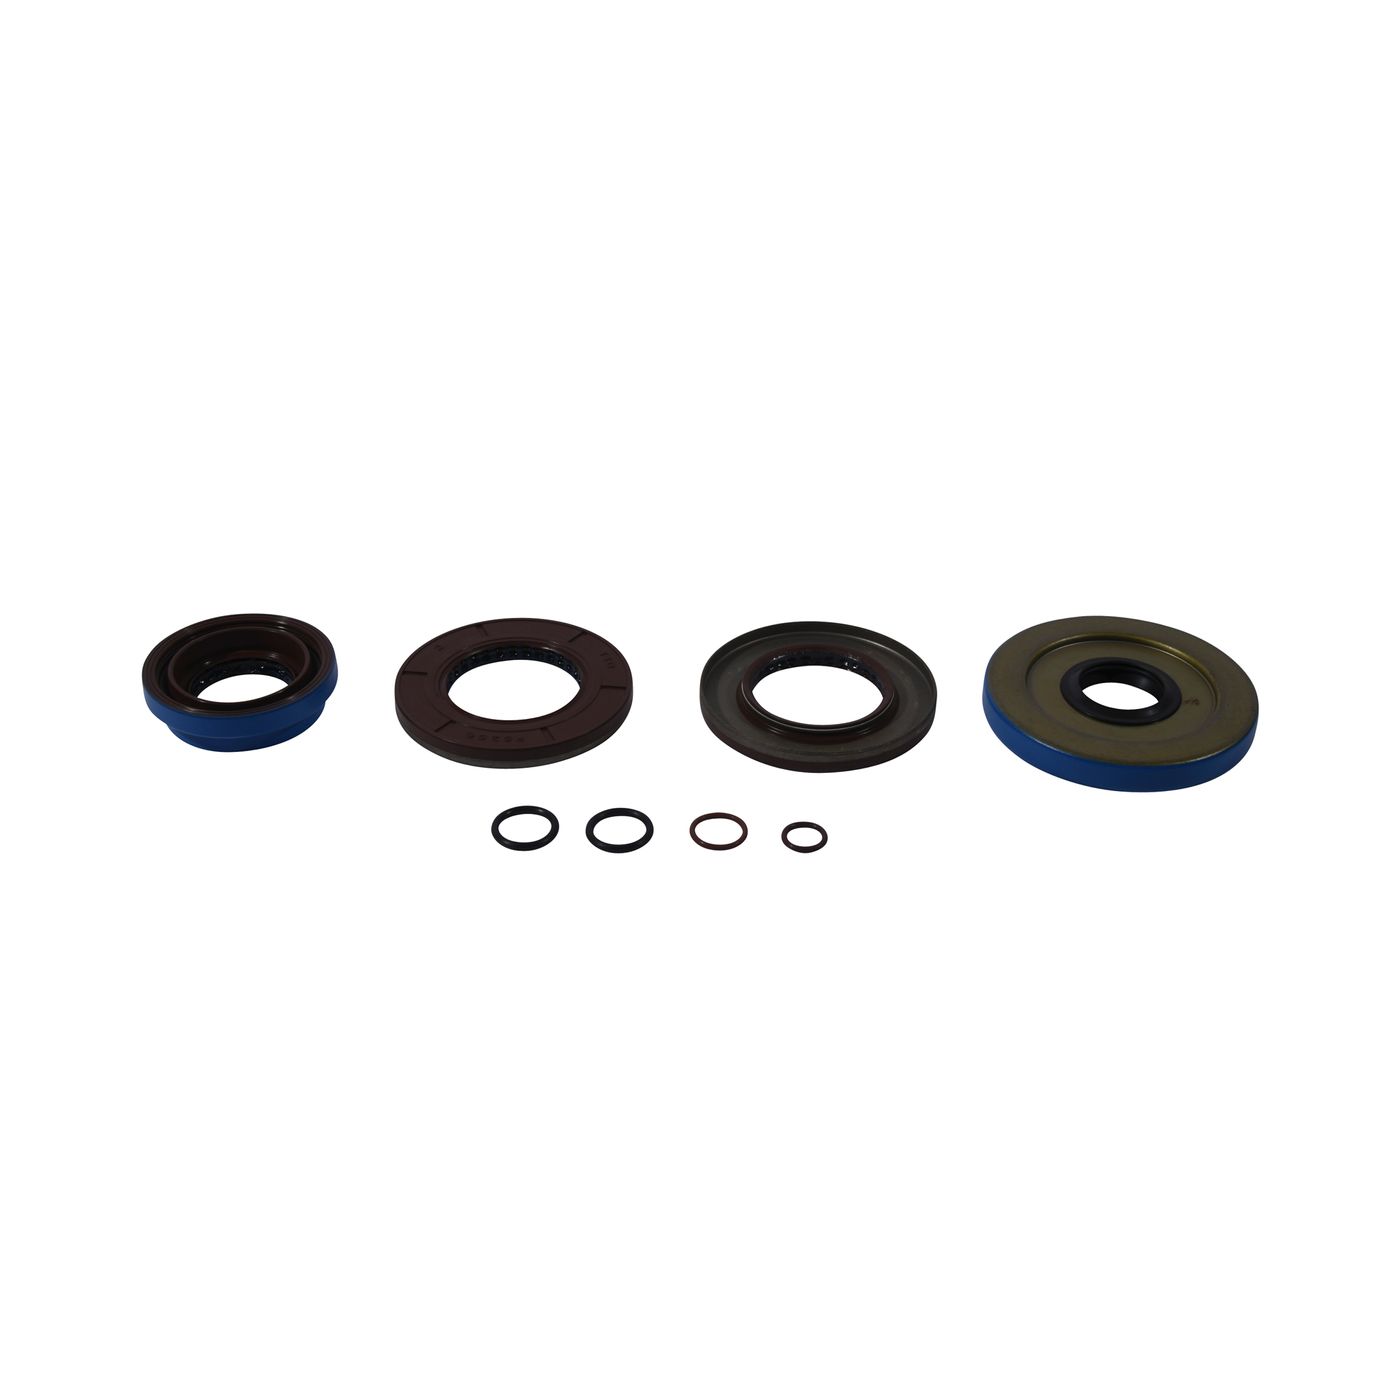 Wrp Diff Seal Kits - WRP252112-5 image